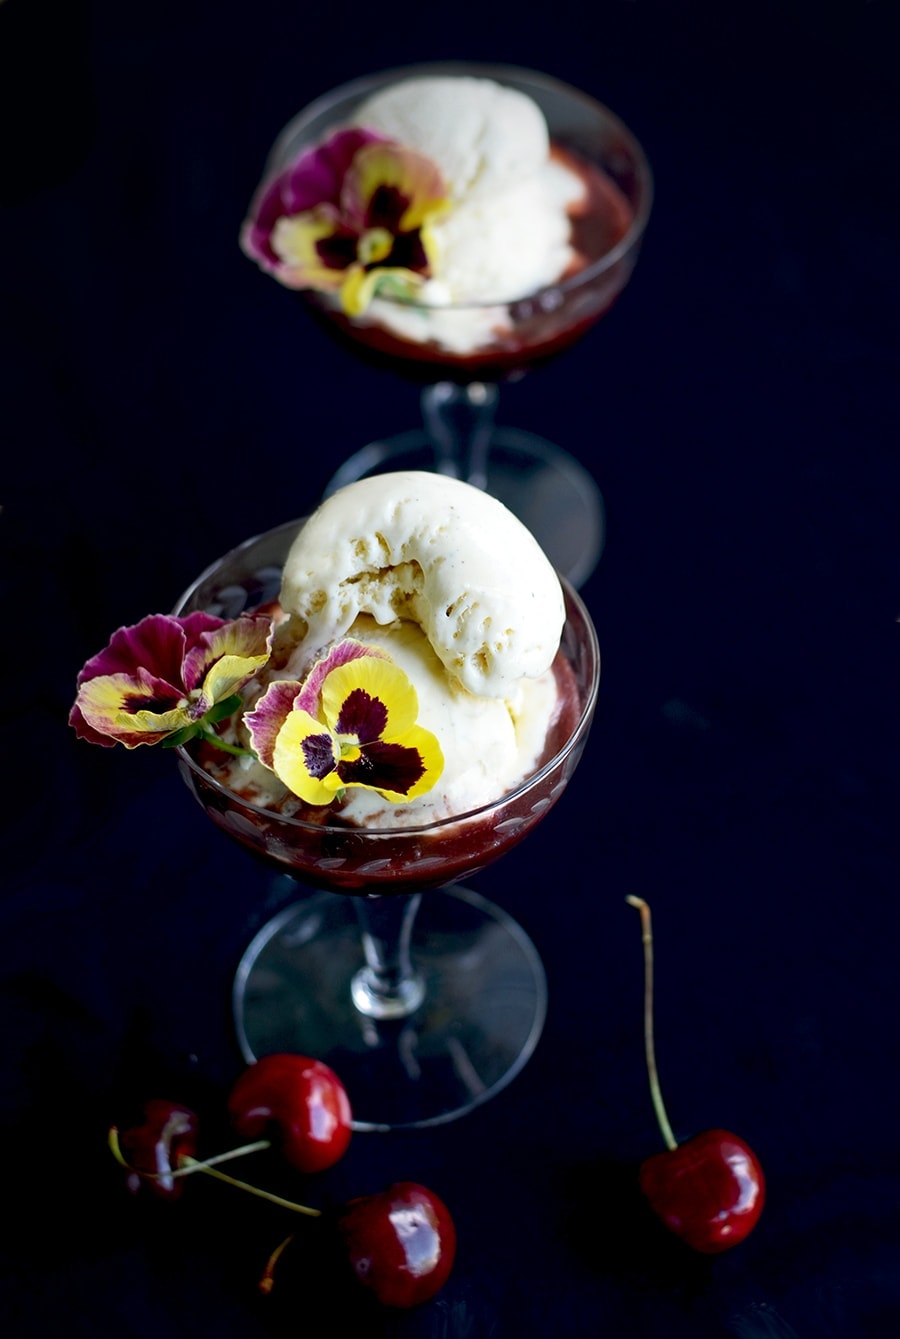 Ice cream sundae vertical Web - Grilled Cherries in Spiced Butter Rum Sauce